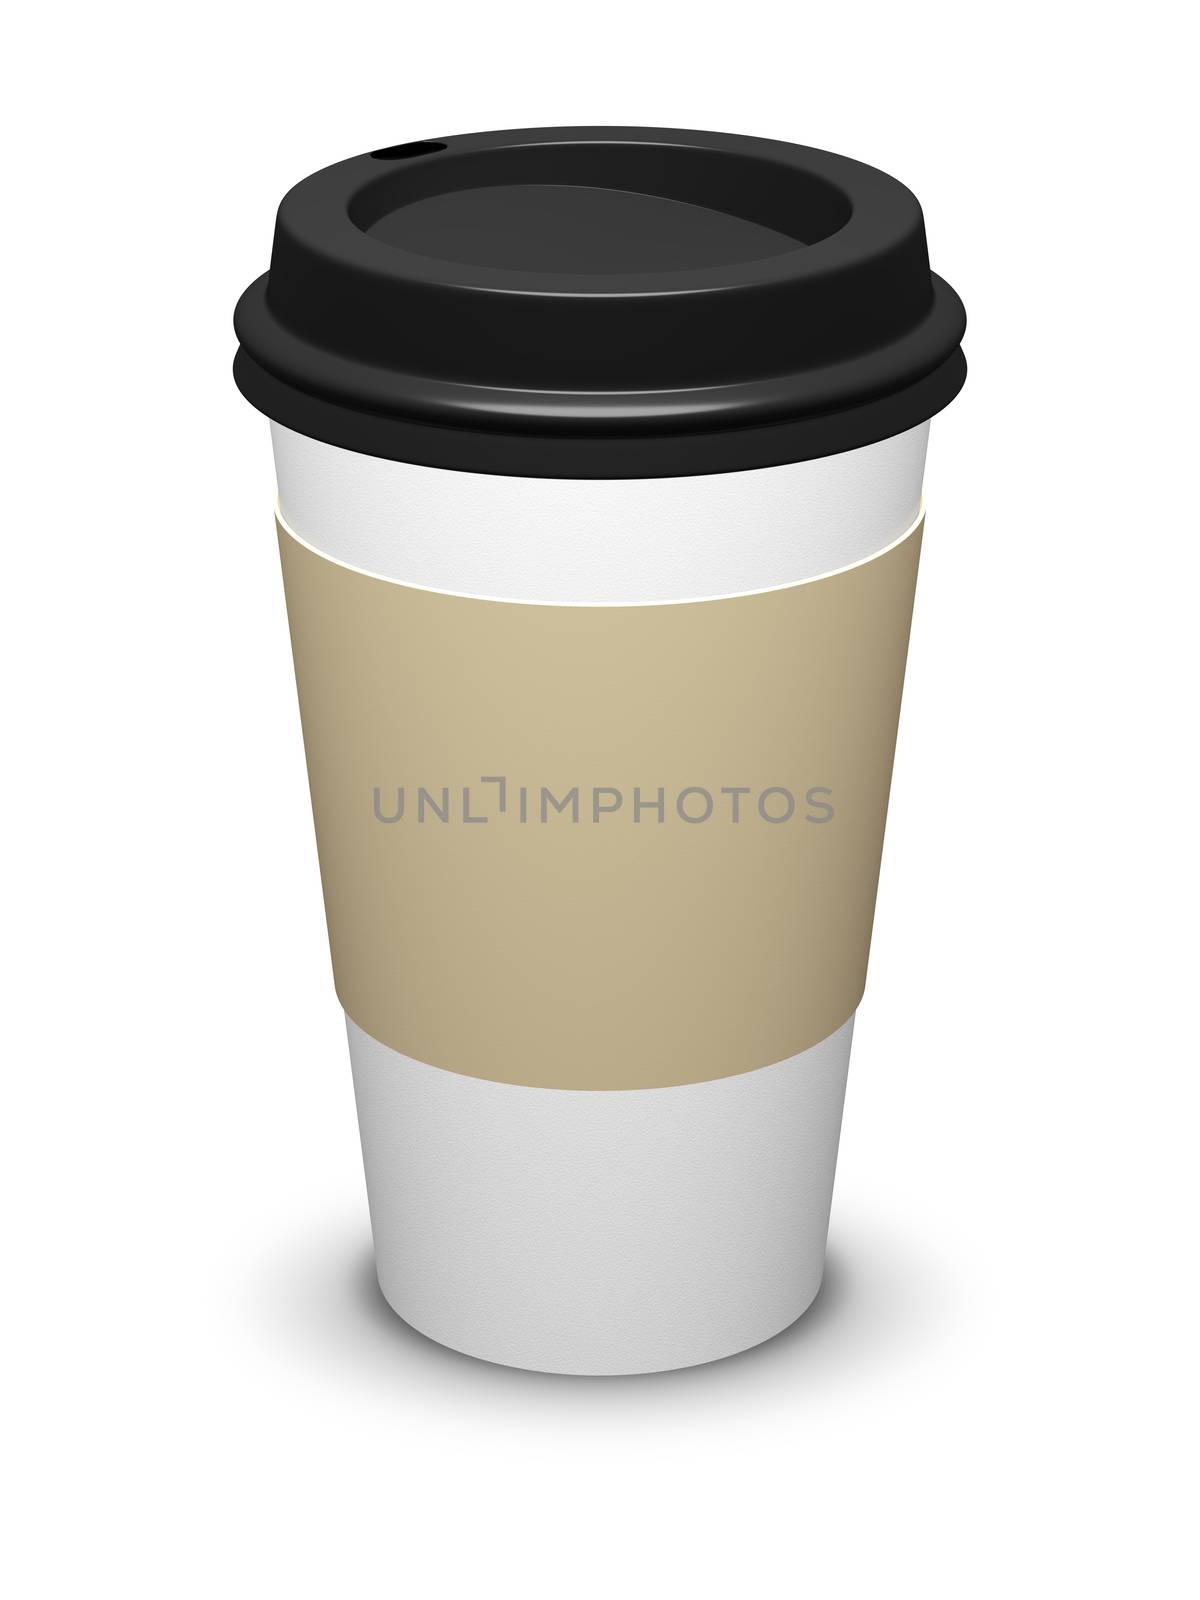 3d illustration of a typical coffee to go cup isolated on white background